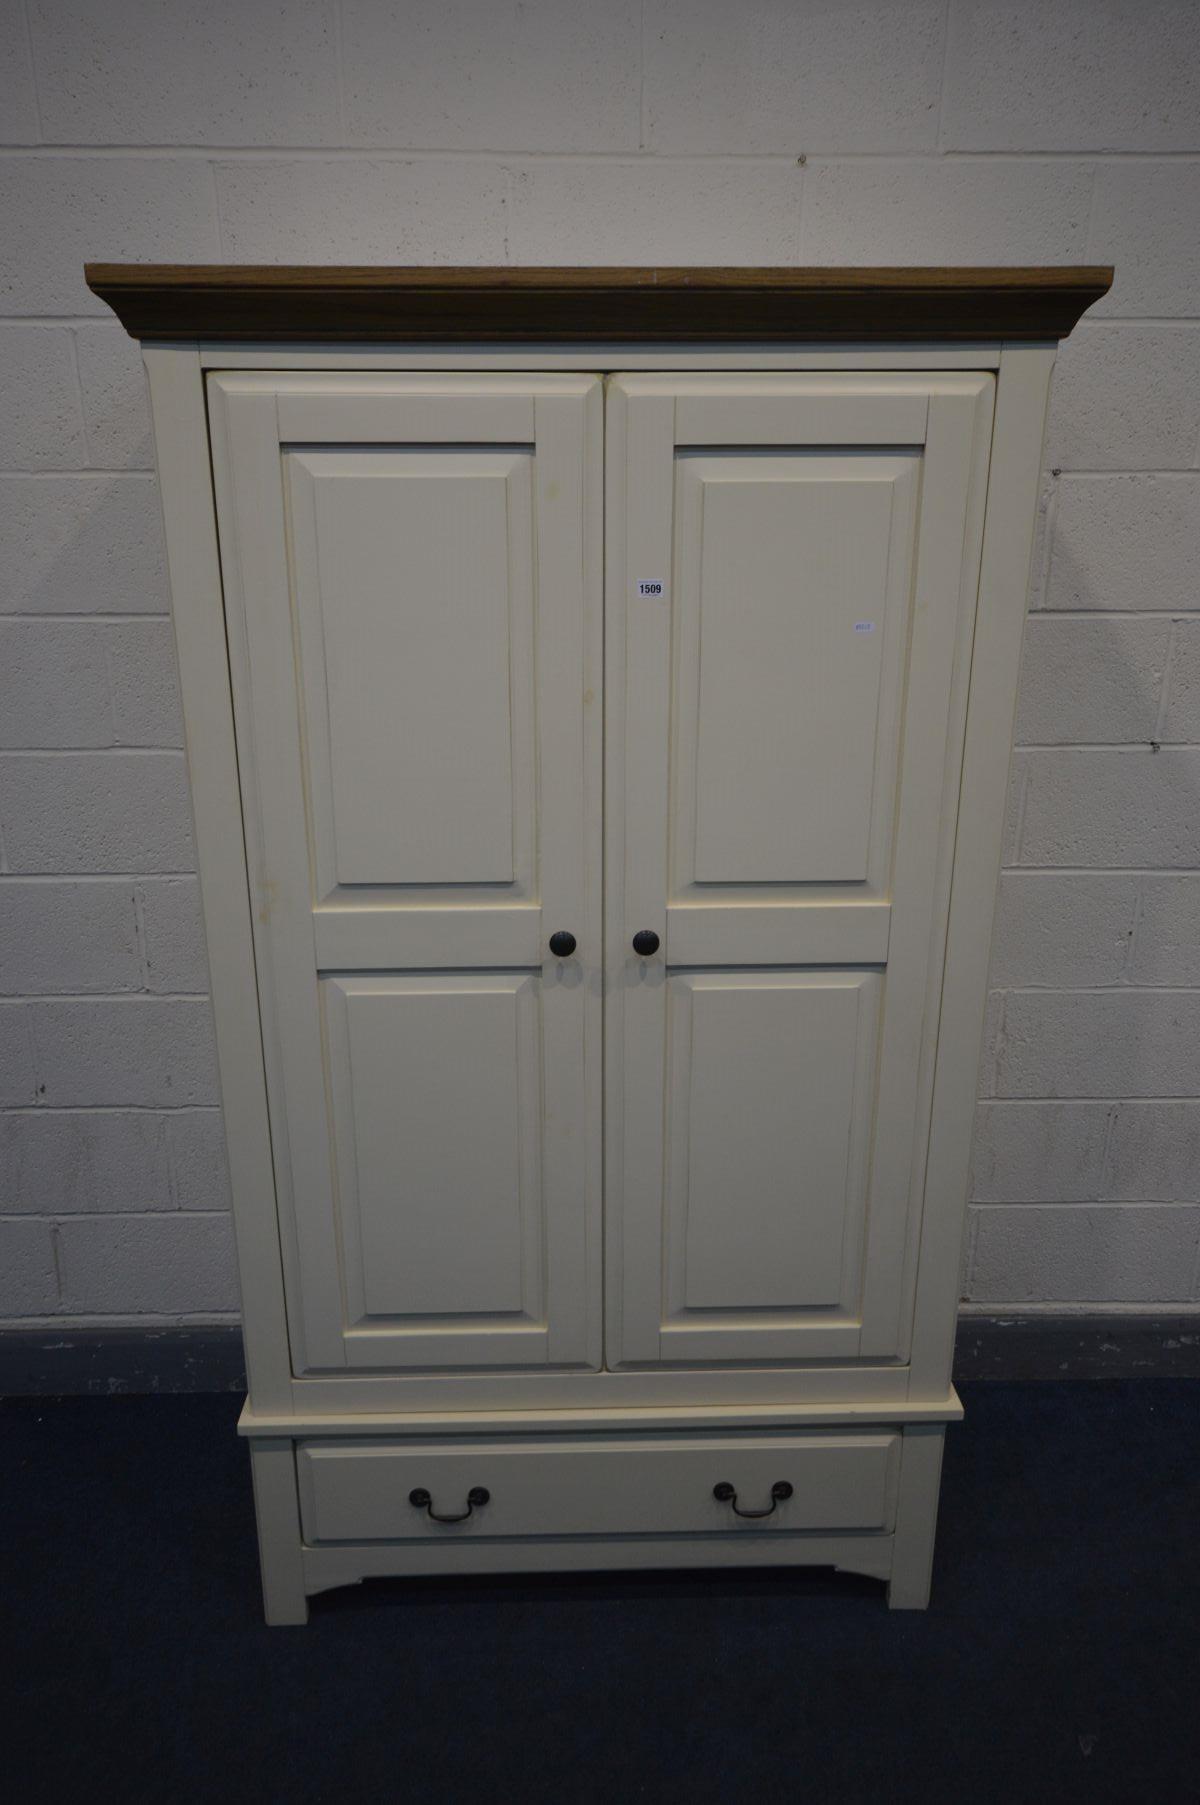 AN OAK AND PARTIALLY PAINTED CREAM DOUBLE DOOR WARDROBE with a single drawer, width 114cm x depth